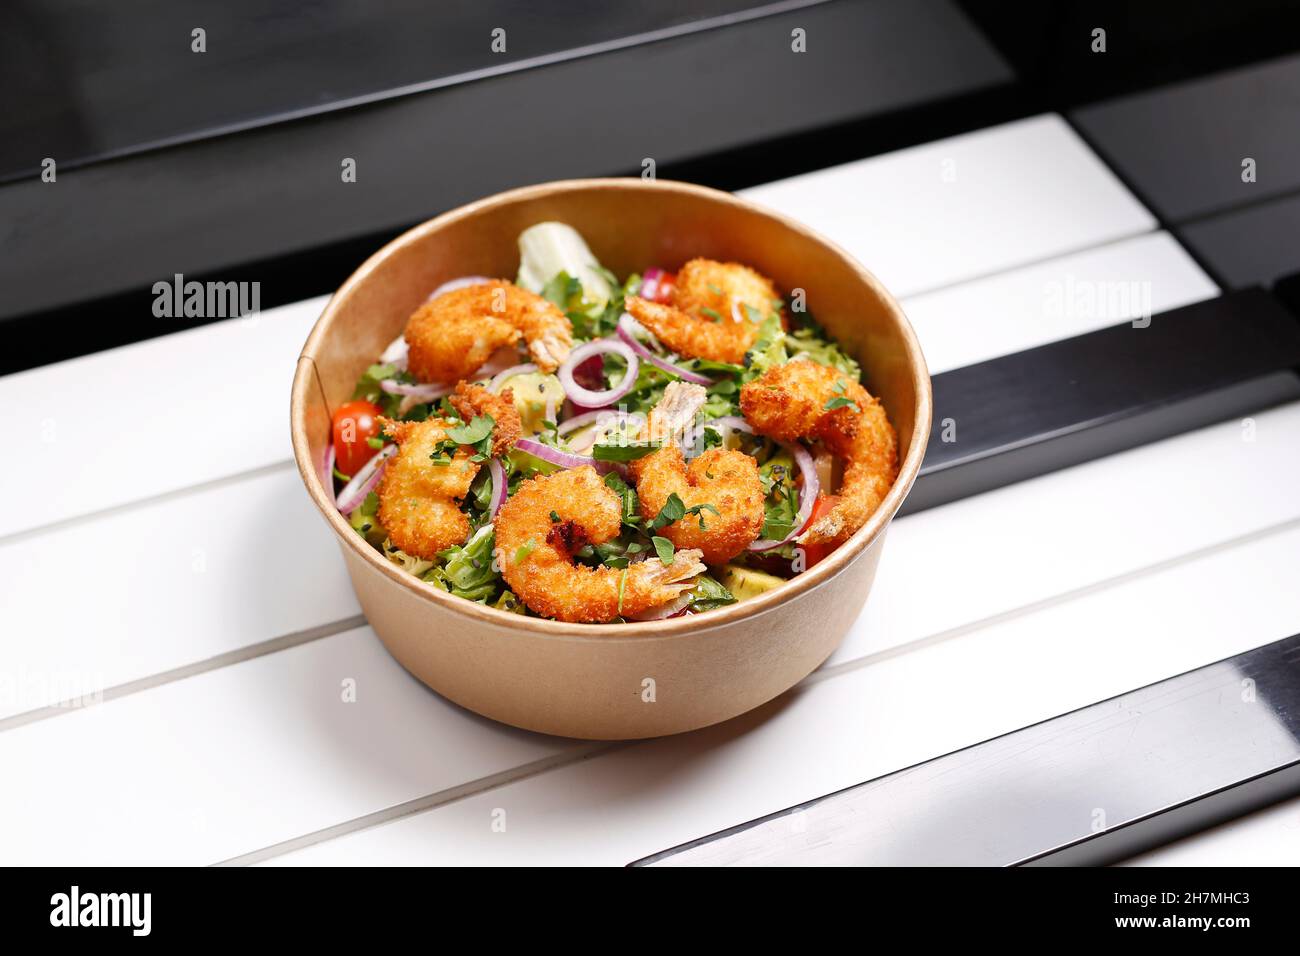 Fried prawns on a green salad. Takeaway, diet box. Appetizing ready-to-go dish served in a disposable box. Culinary photography. Food background. Stock Photo